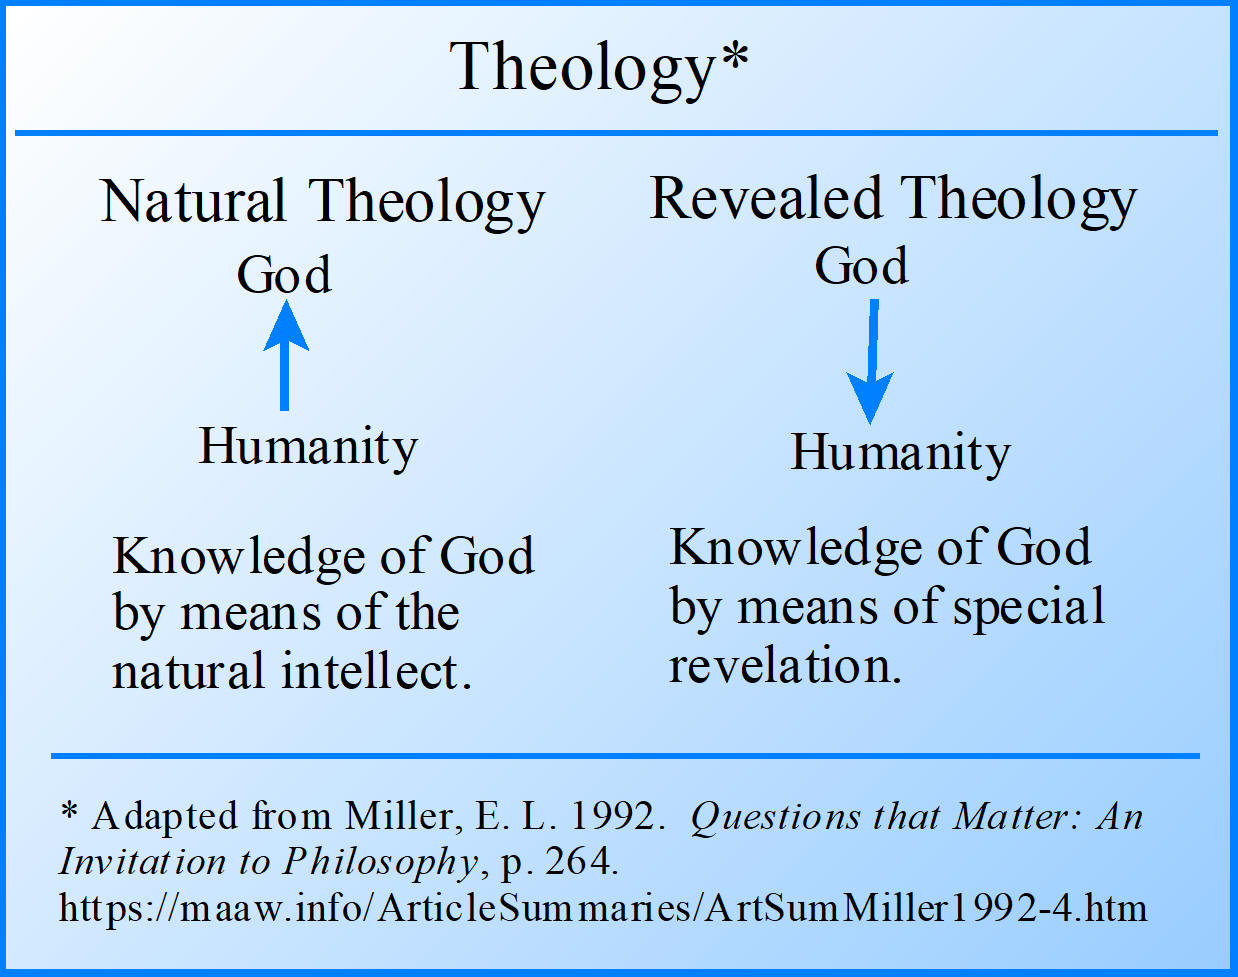 Theology - Natural and Revealed